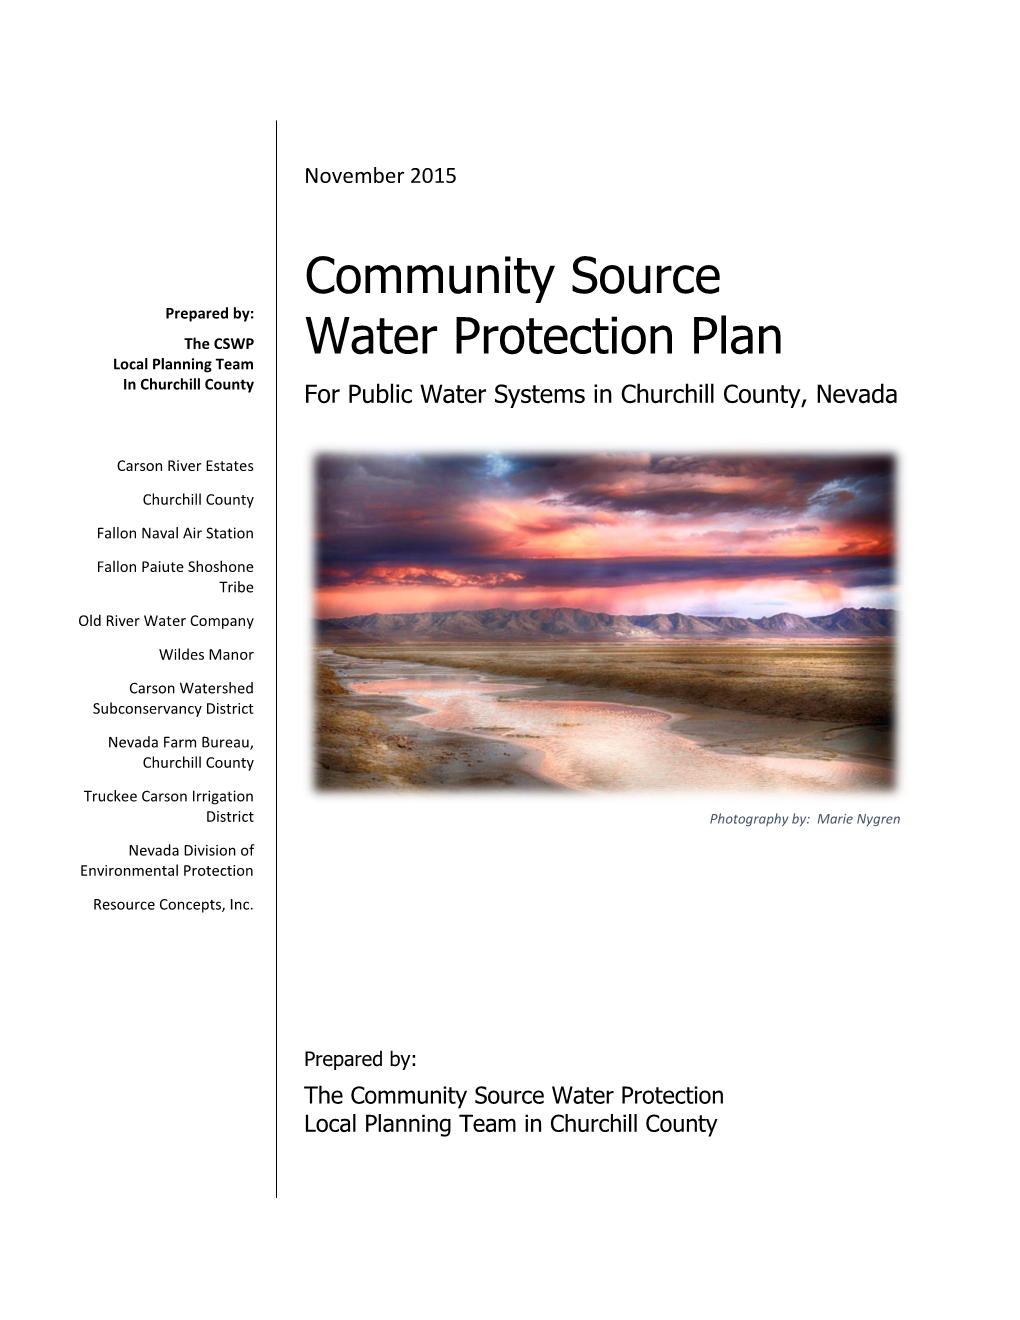 Community Source Water Protection Plan for Public Water Systems in Churchill County, Nevada